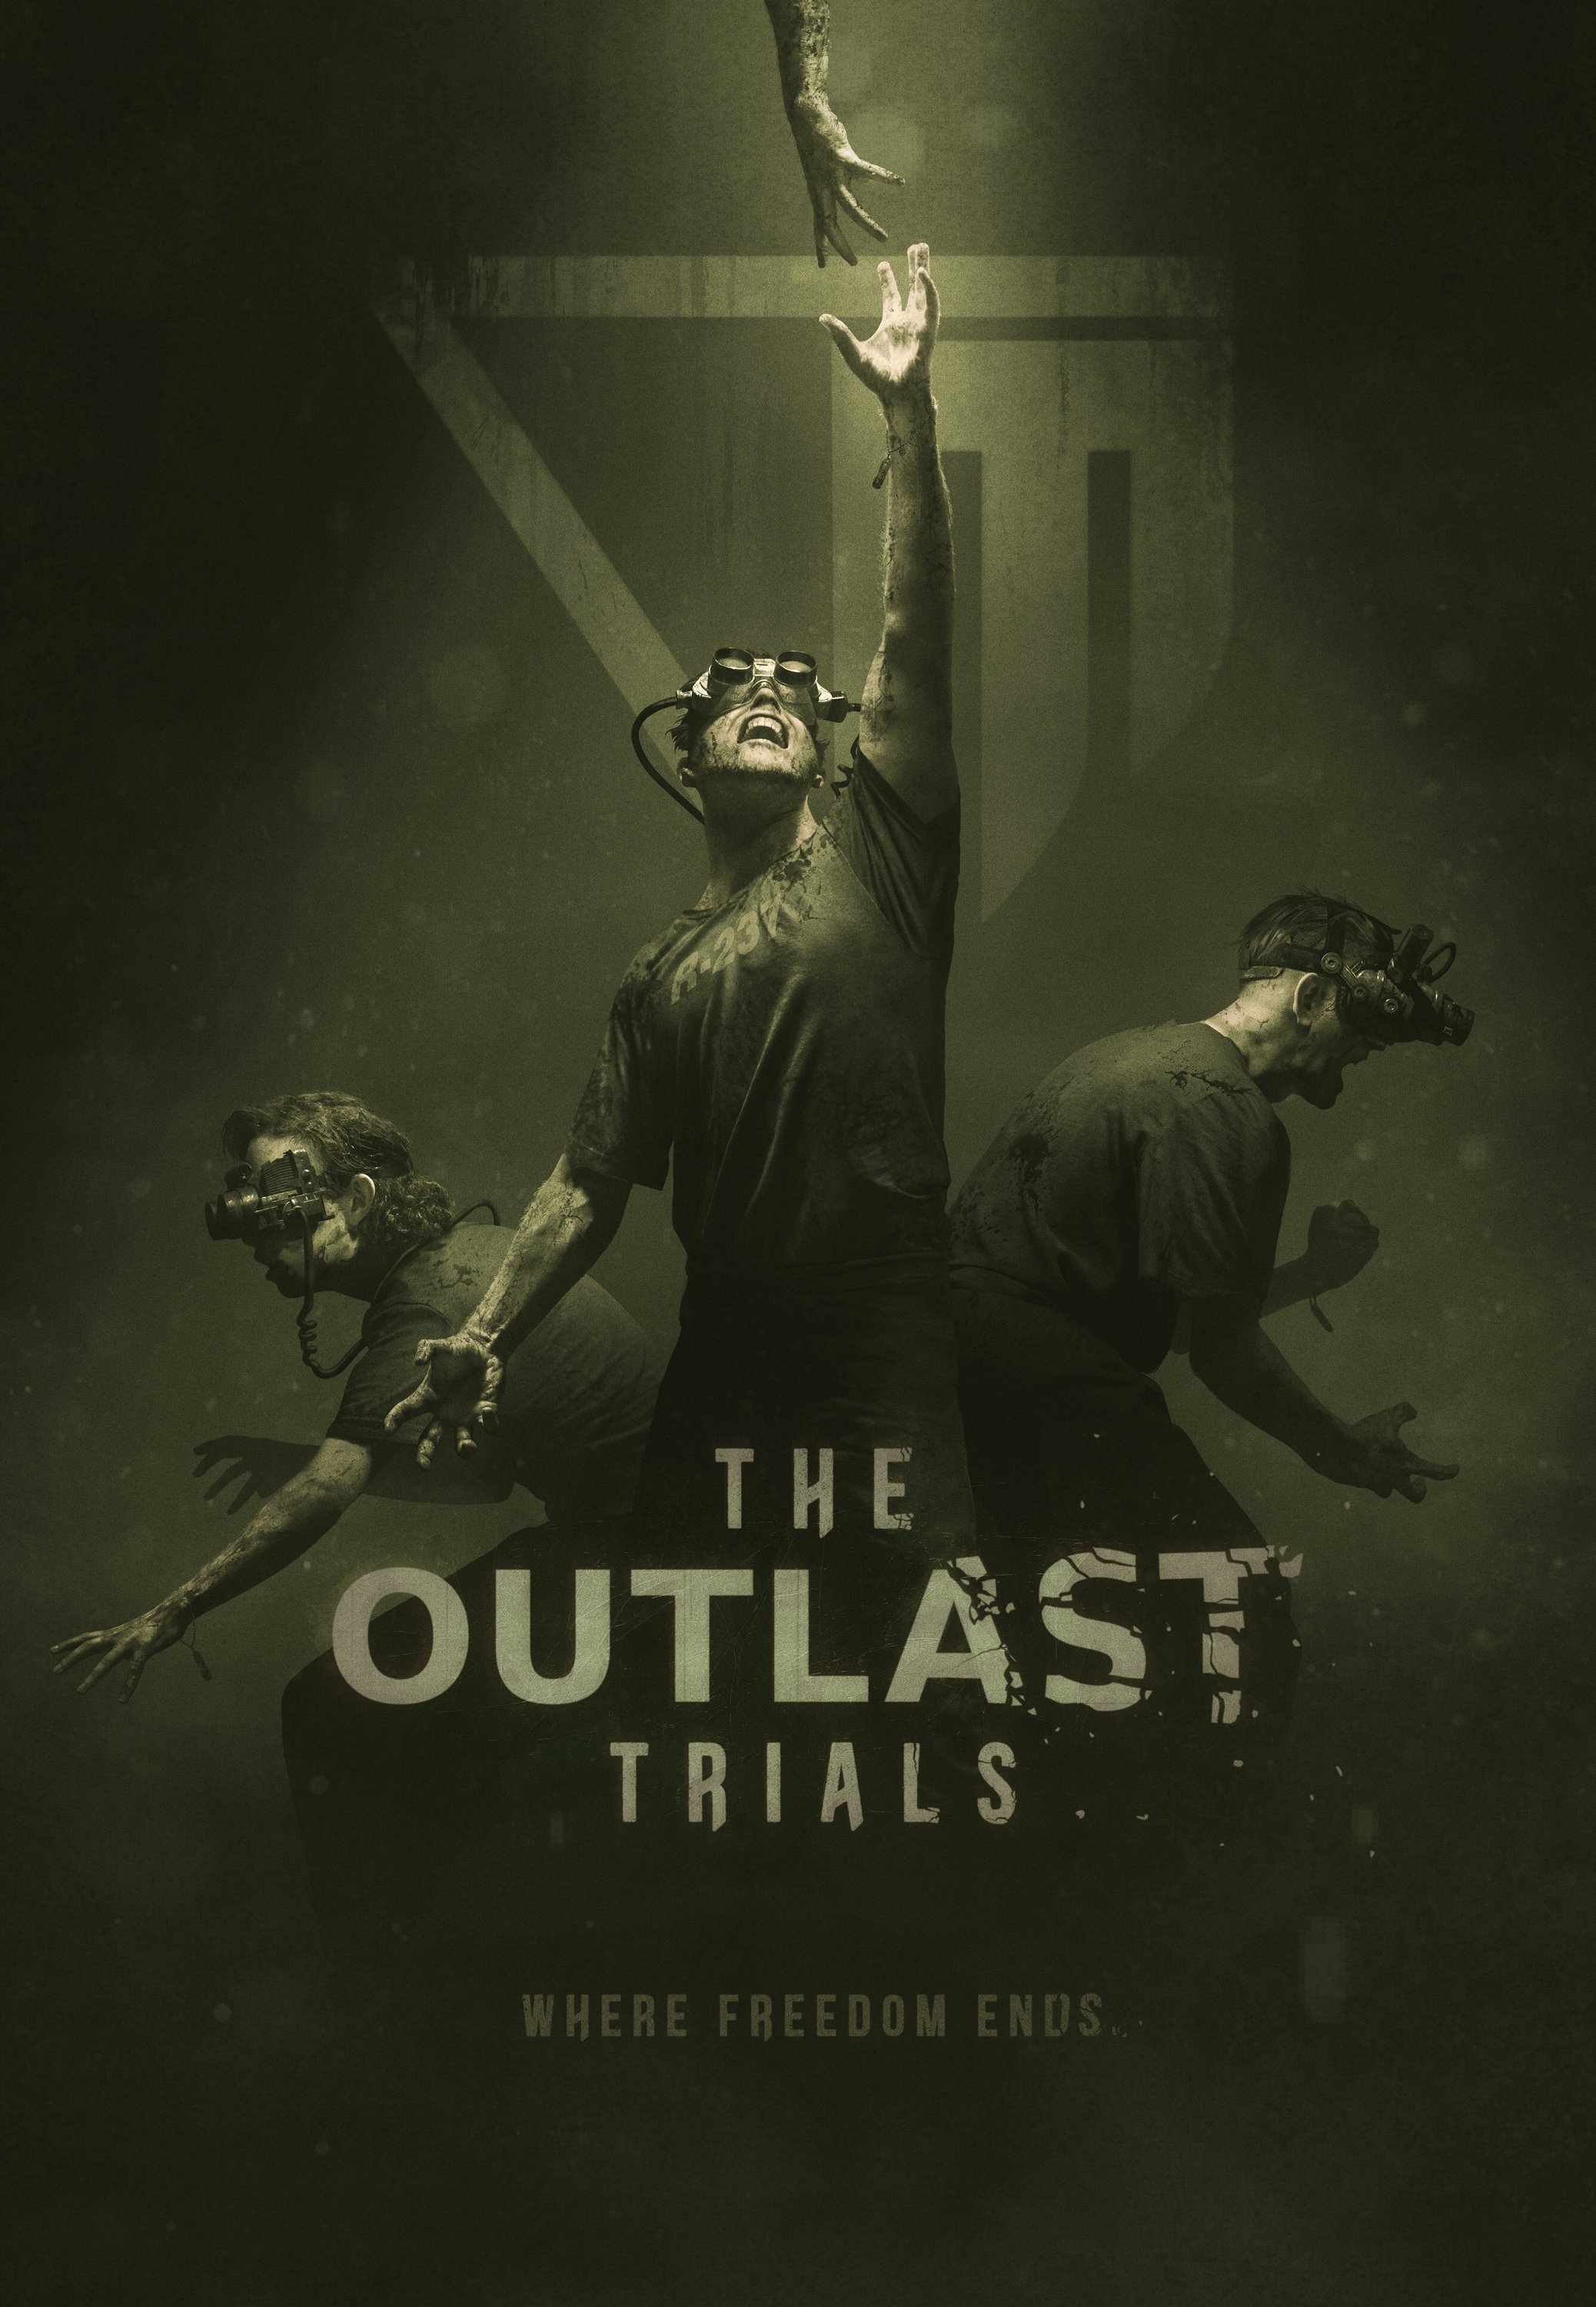 The Outlast Trials now on Steam Deck